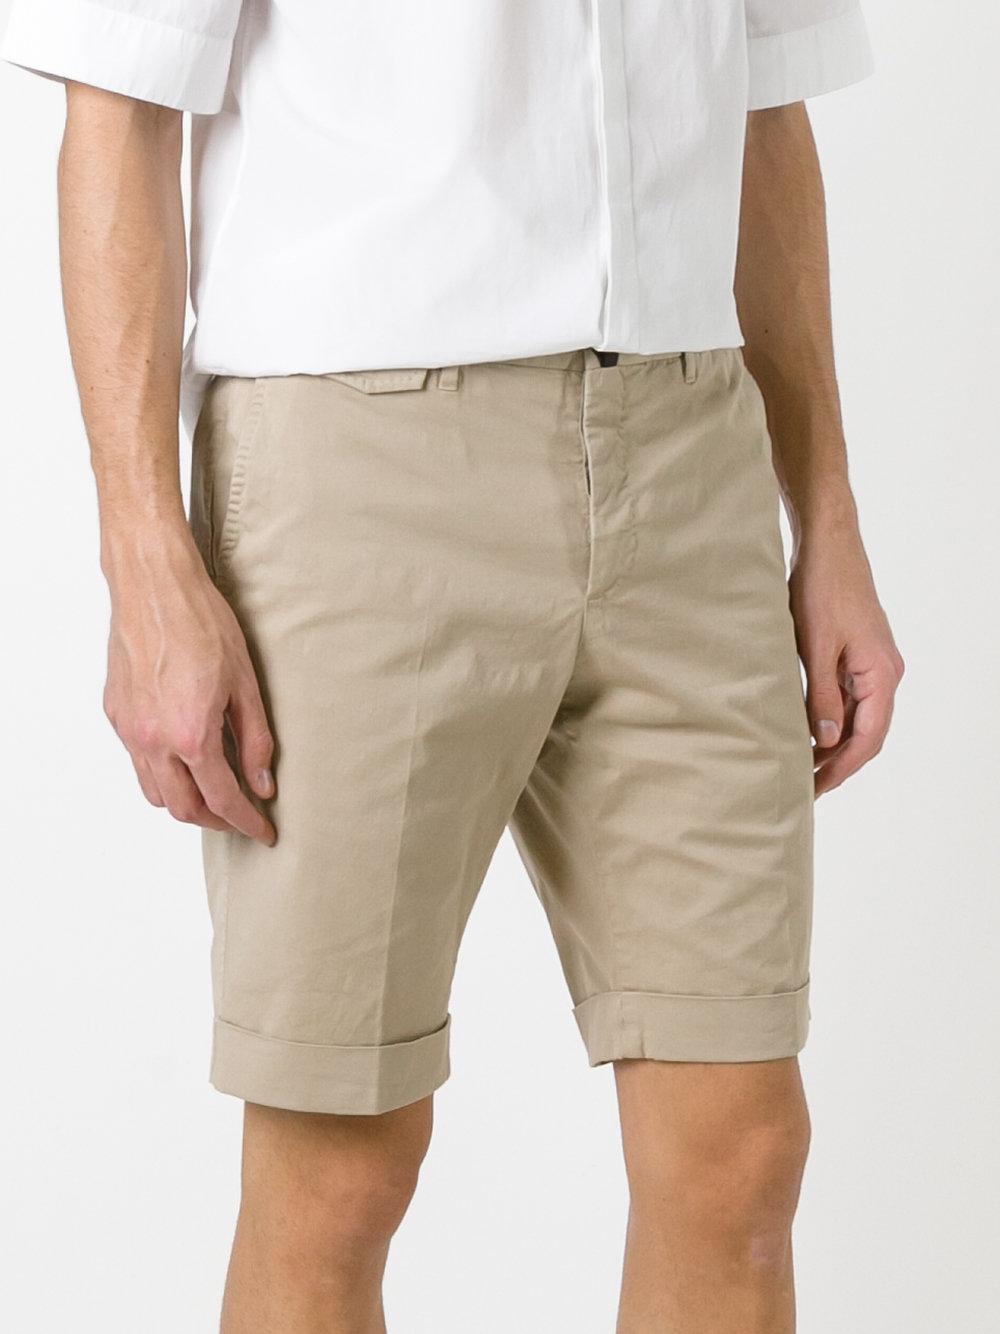 Lyst - Pt01 Classic Chino Shorts in Natural for Men